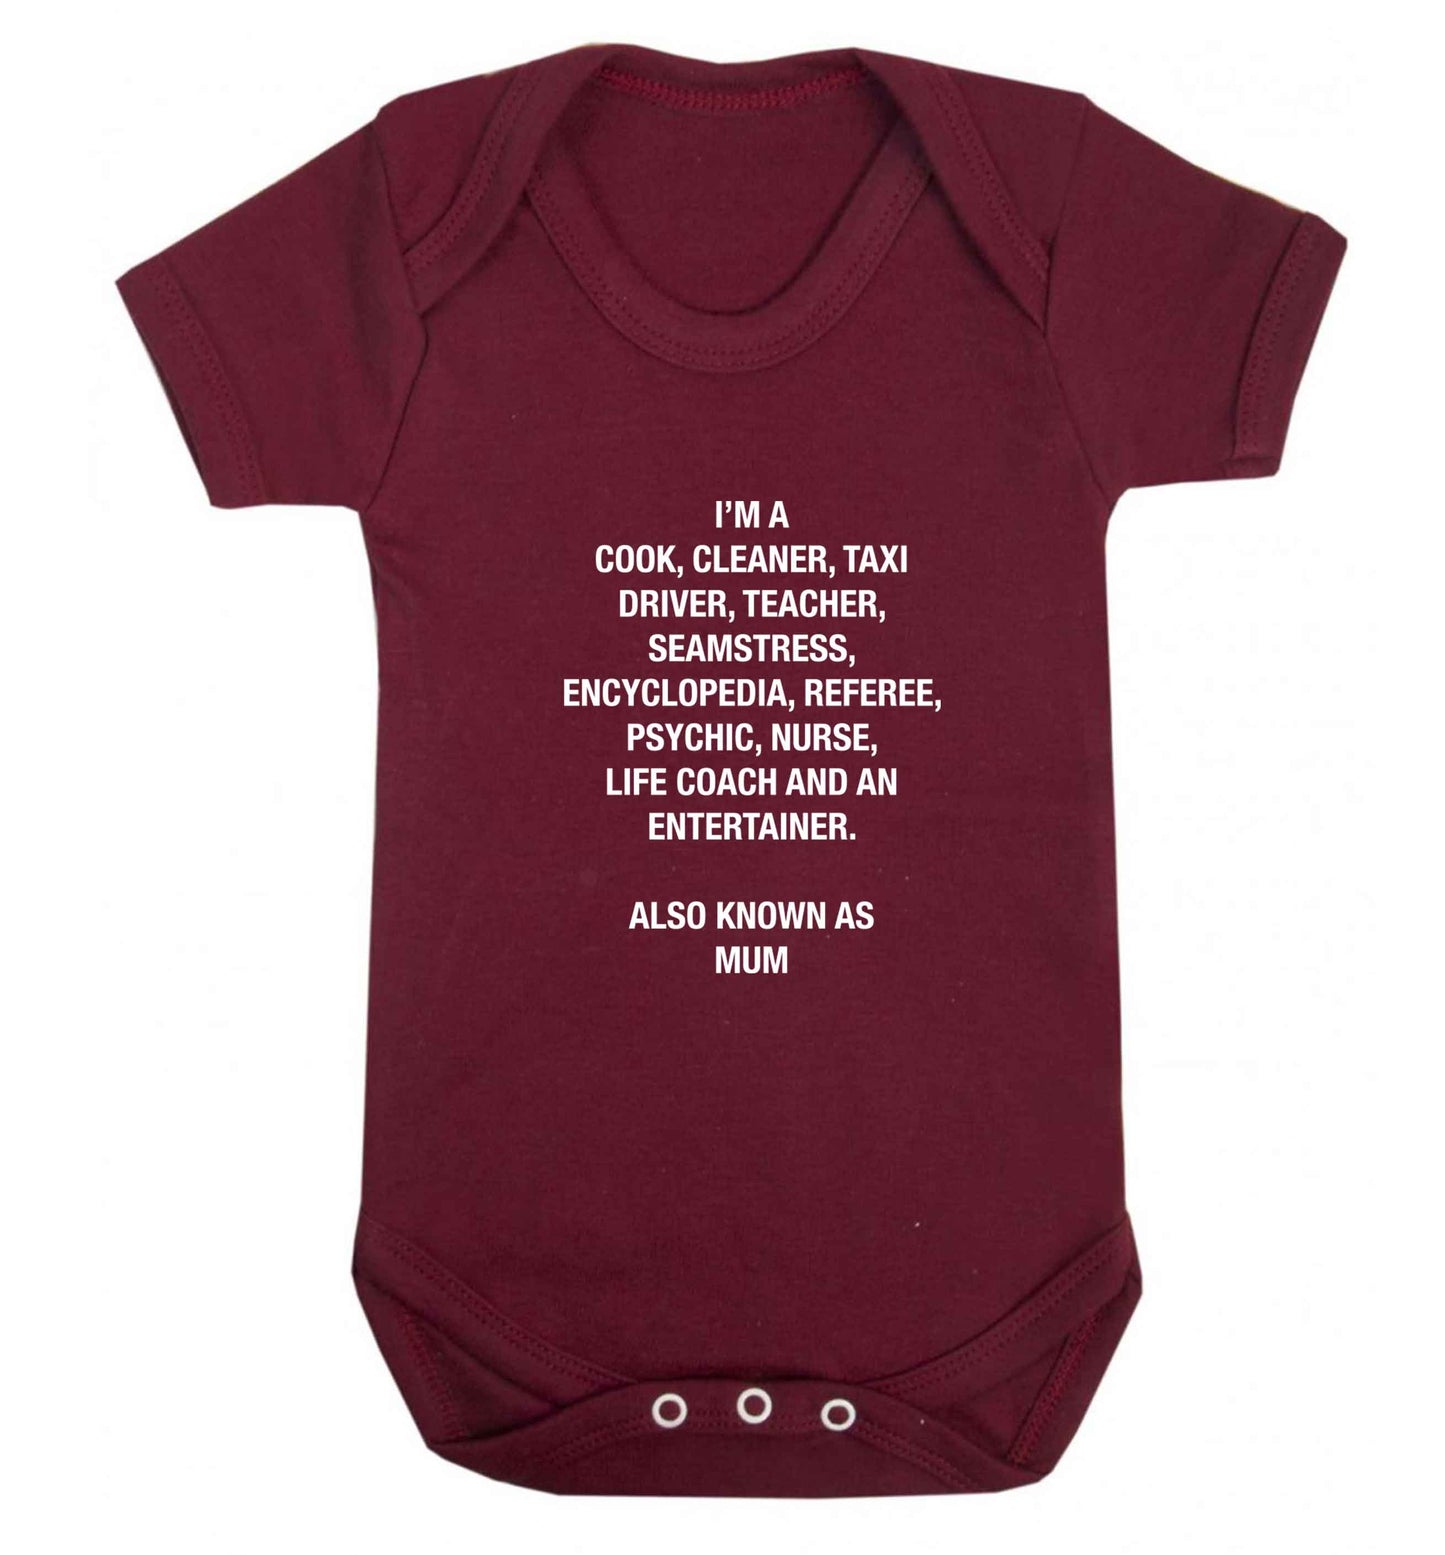 Funny gifts for your mum on mother's dayor her birthday! Mum, cook, cleaner, taxi driver, teacher, seamstress, encyclopedia, referee, psychic, nurse, life coach and entertainer baby vest maroon 18-24 months